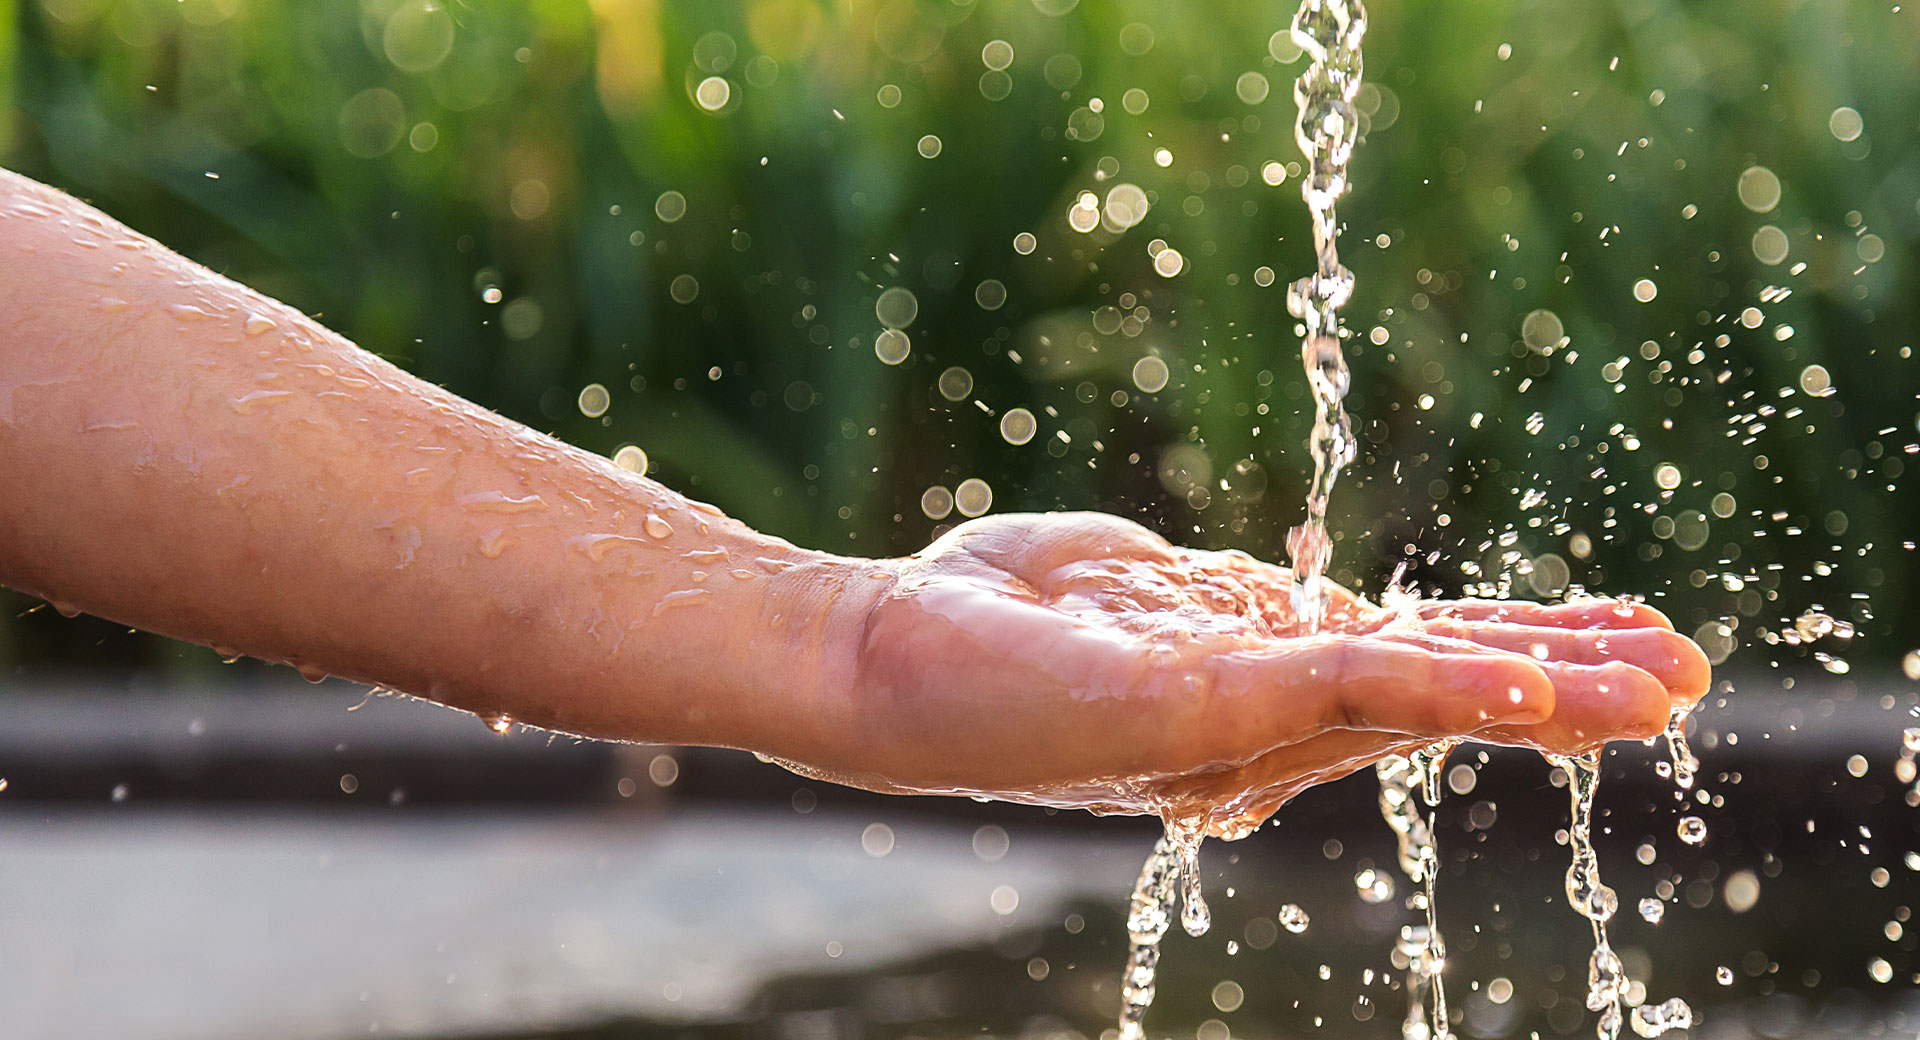 A close-up of water splashing into the palm of a person's hand